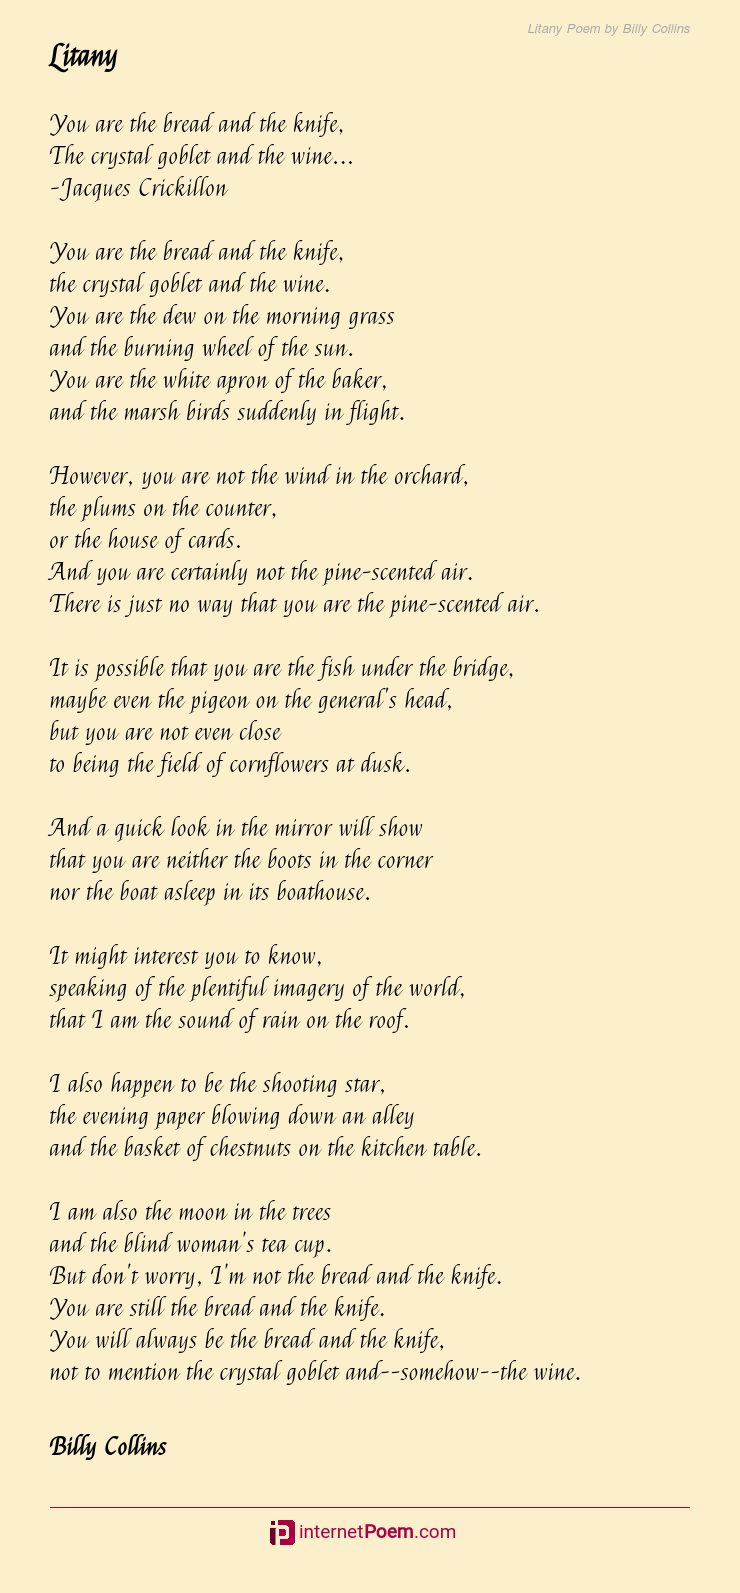 Litany Poem by Billy Collins